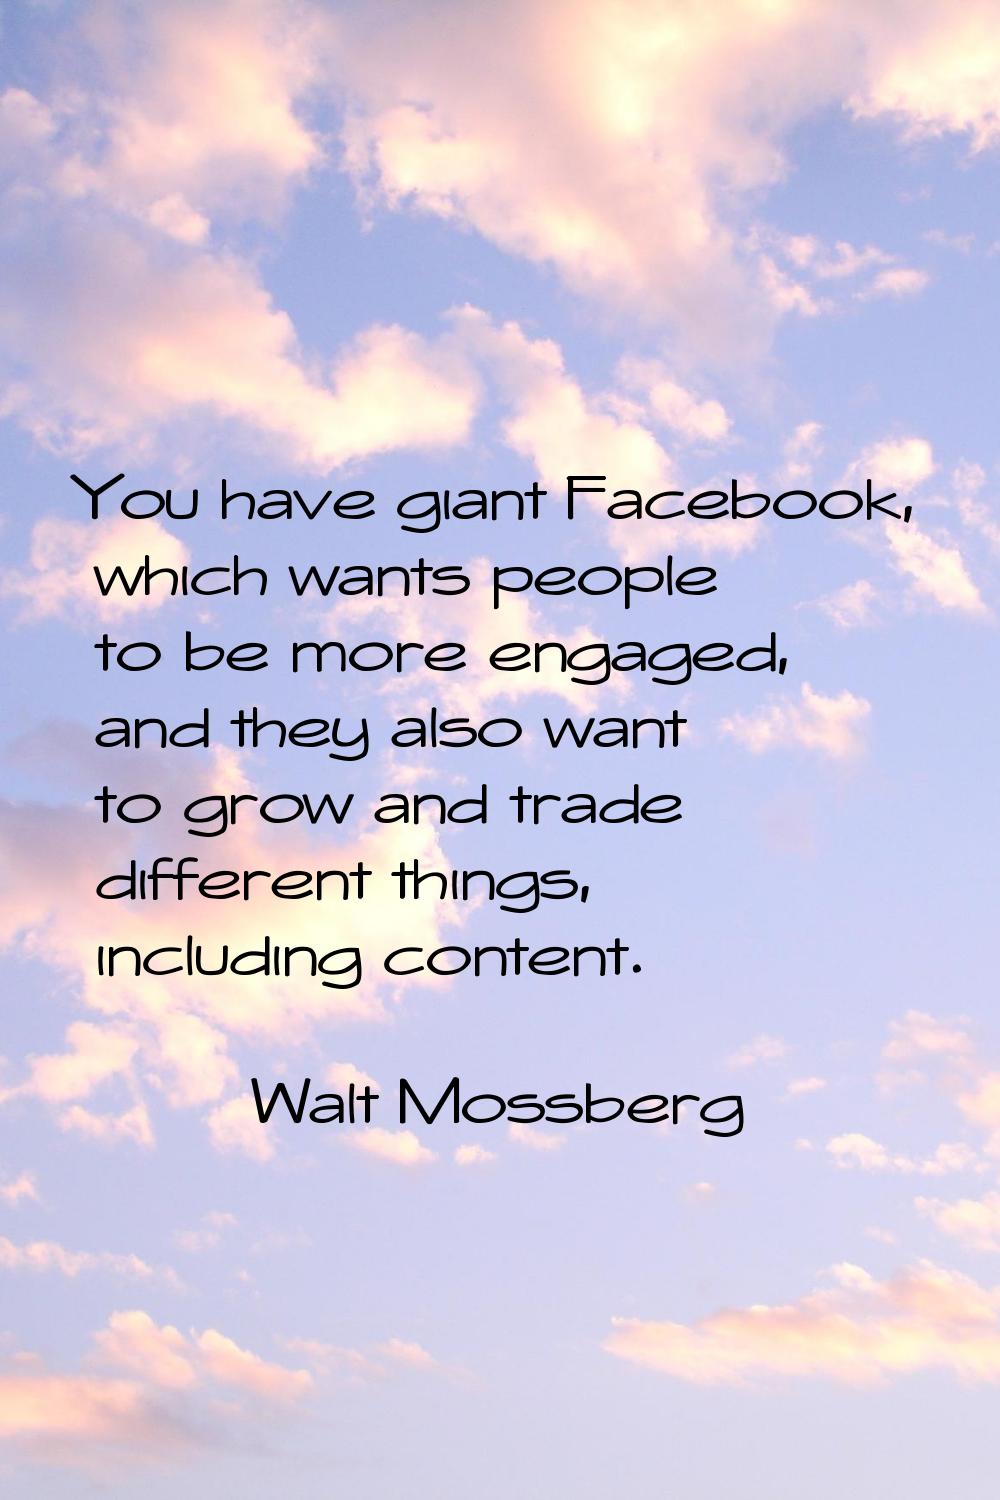 You have giant Facebook, which wants people to be more engaged, and they also want to grow and trad